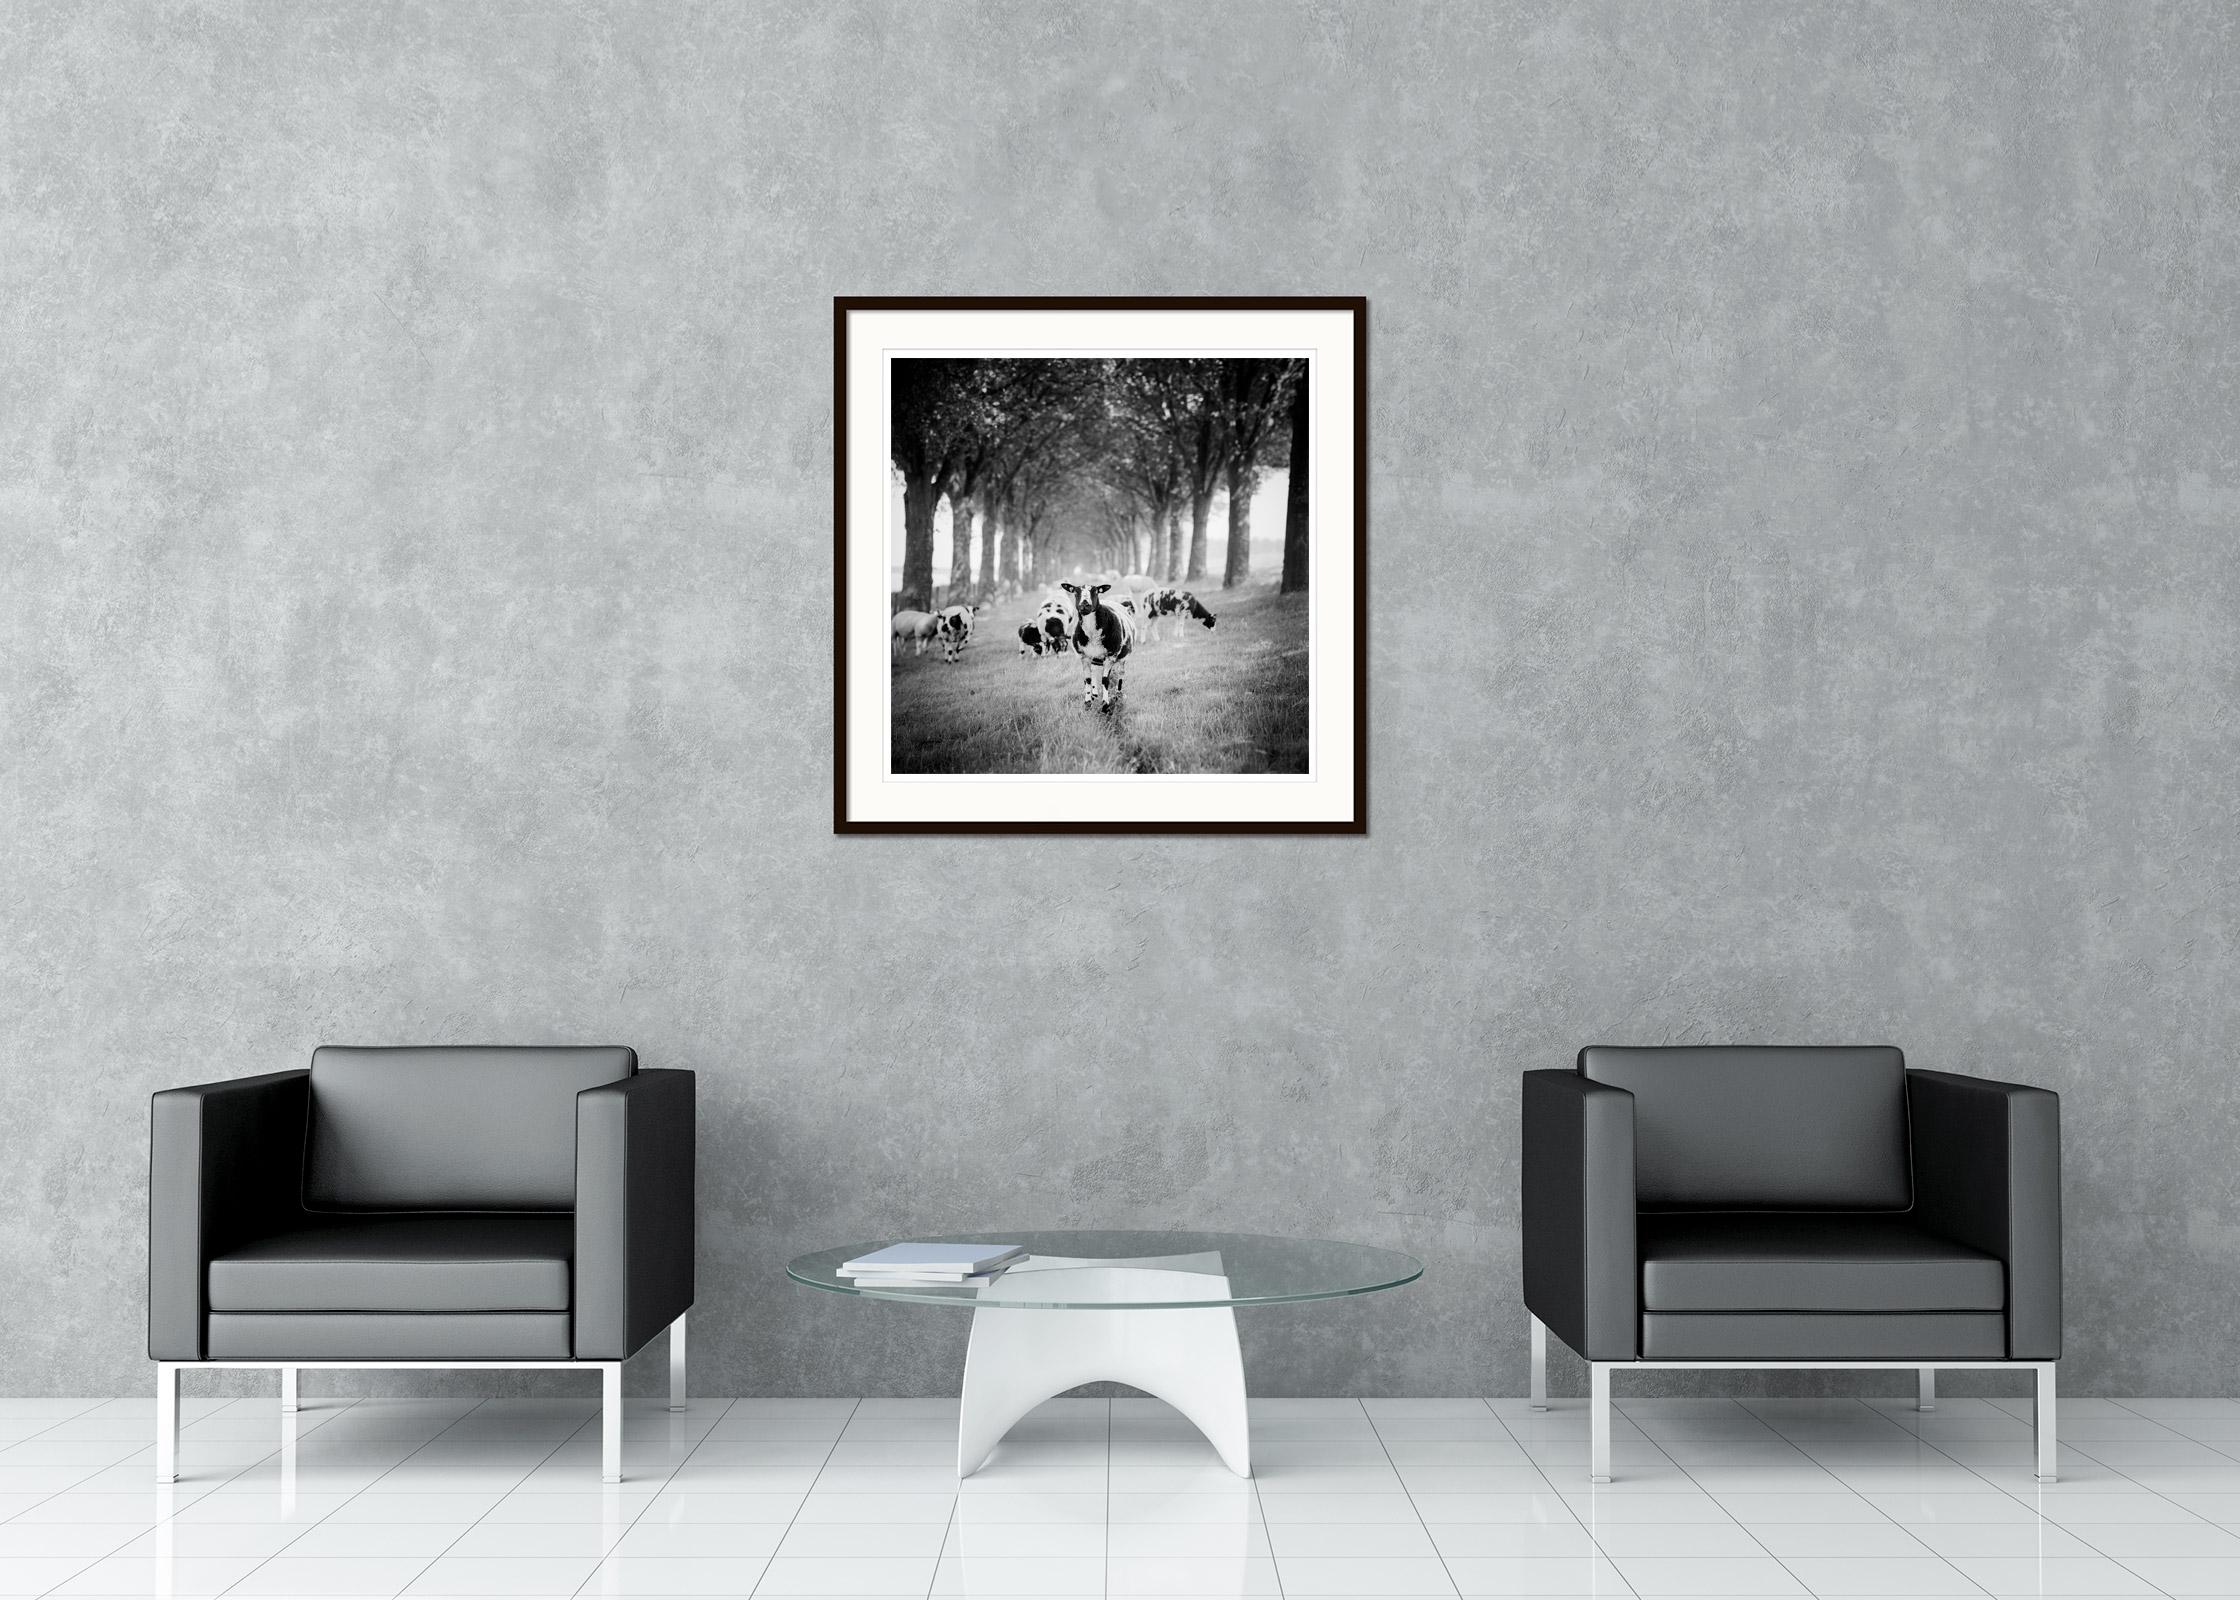 Black and White Fine Art panorama landscape photography. Lots of sheep in a beautiful tree avenue in the Netherlands. Archival pigment ink print, edition of 9. Signed, titled, dated and numbered by artist. Certificate of authenticity included.